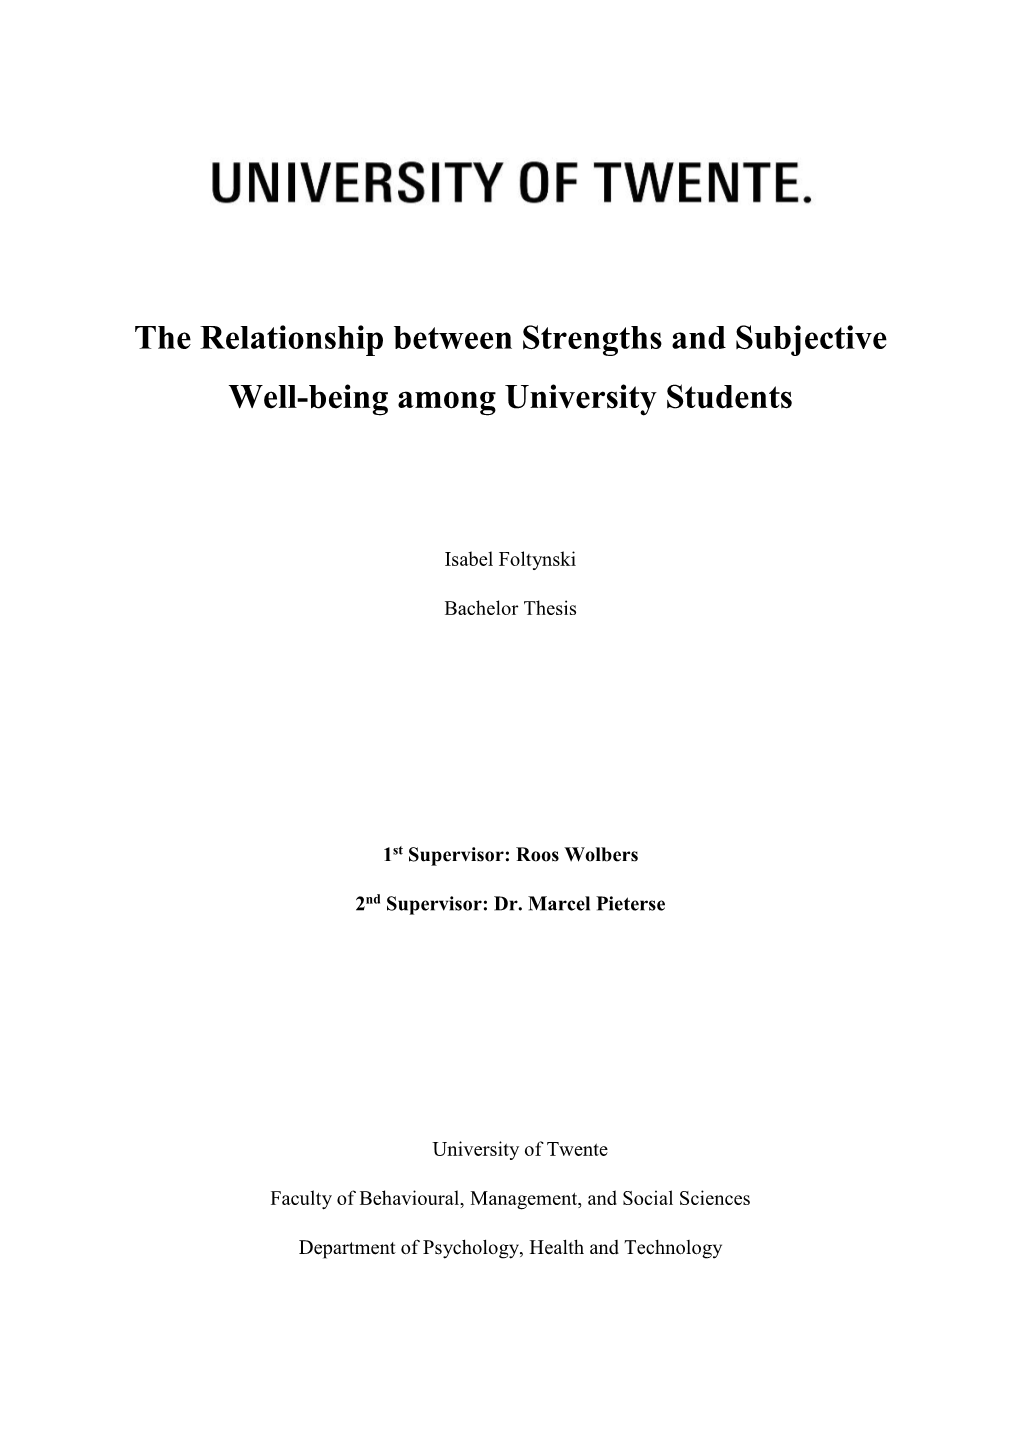 The Relationship Between Strengths and Subjective Well-Being Among University Students